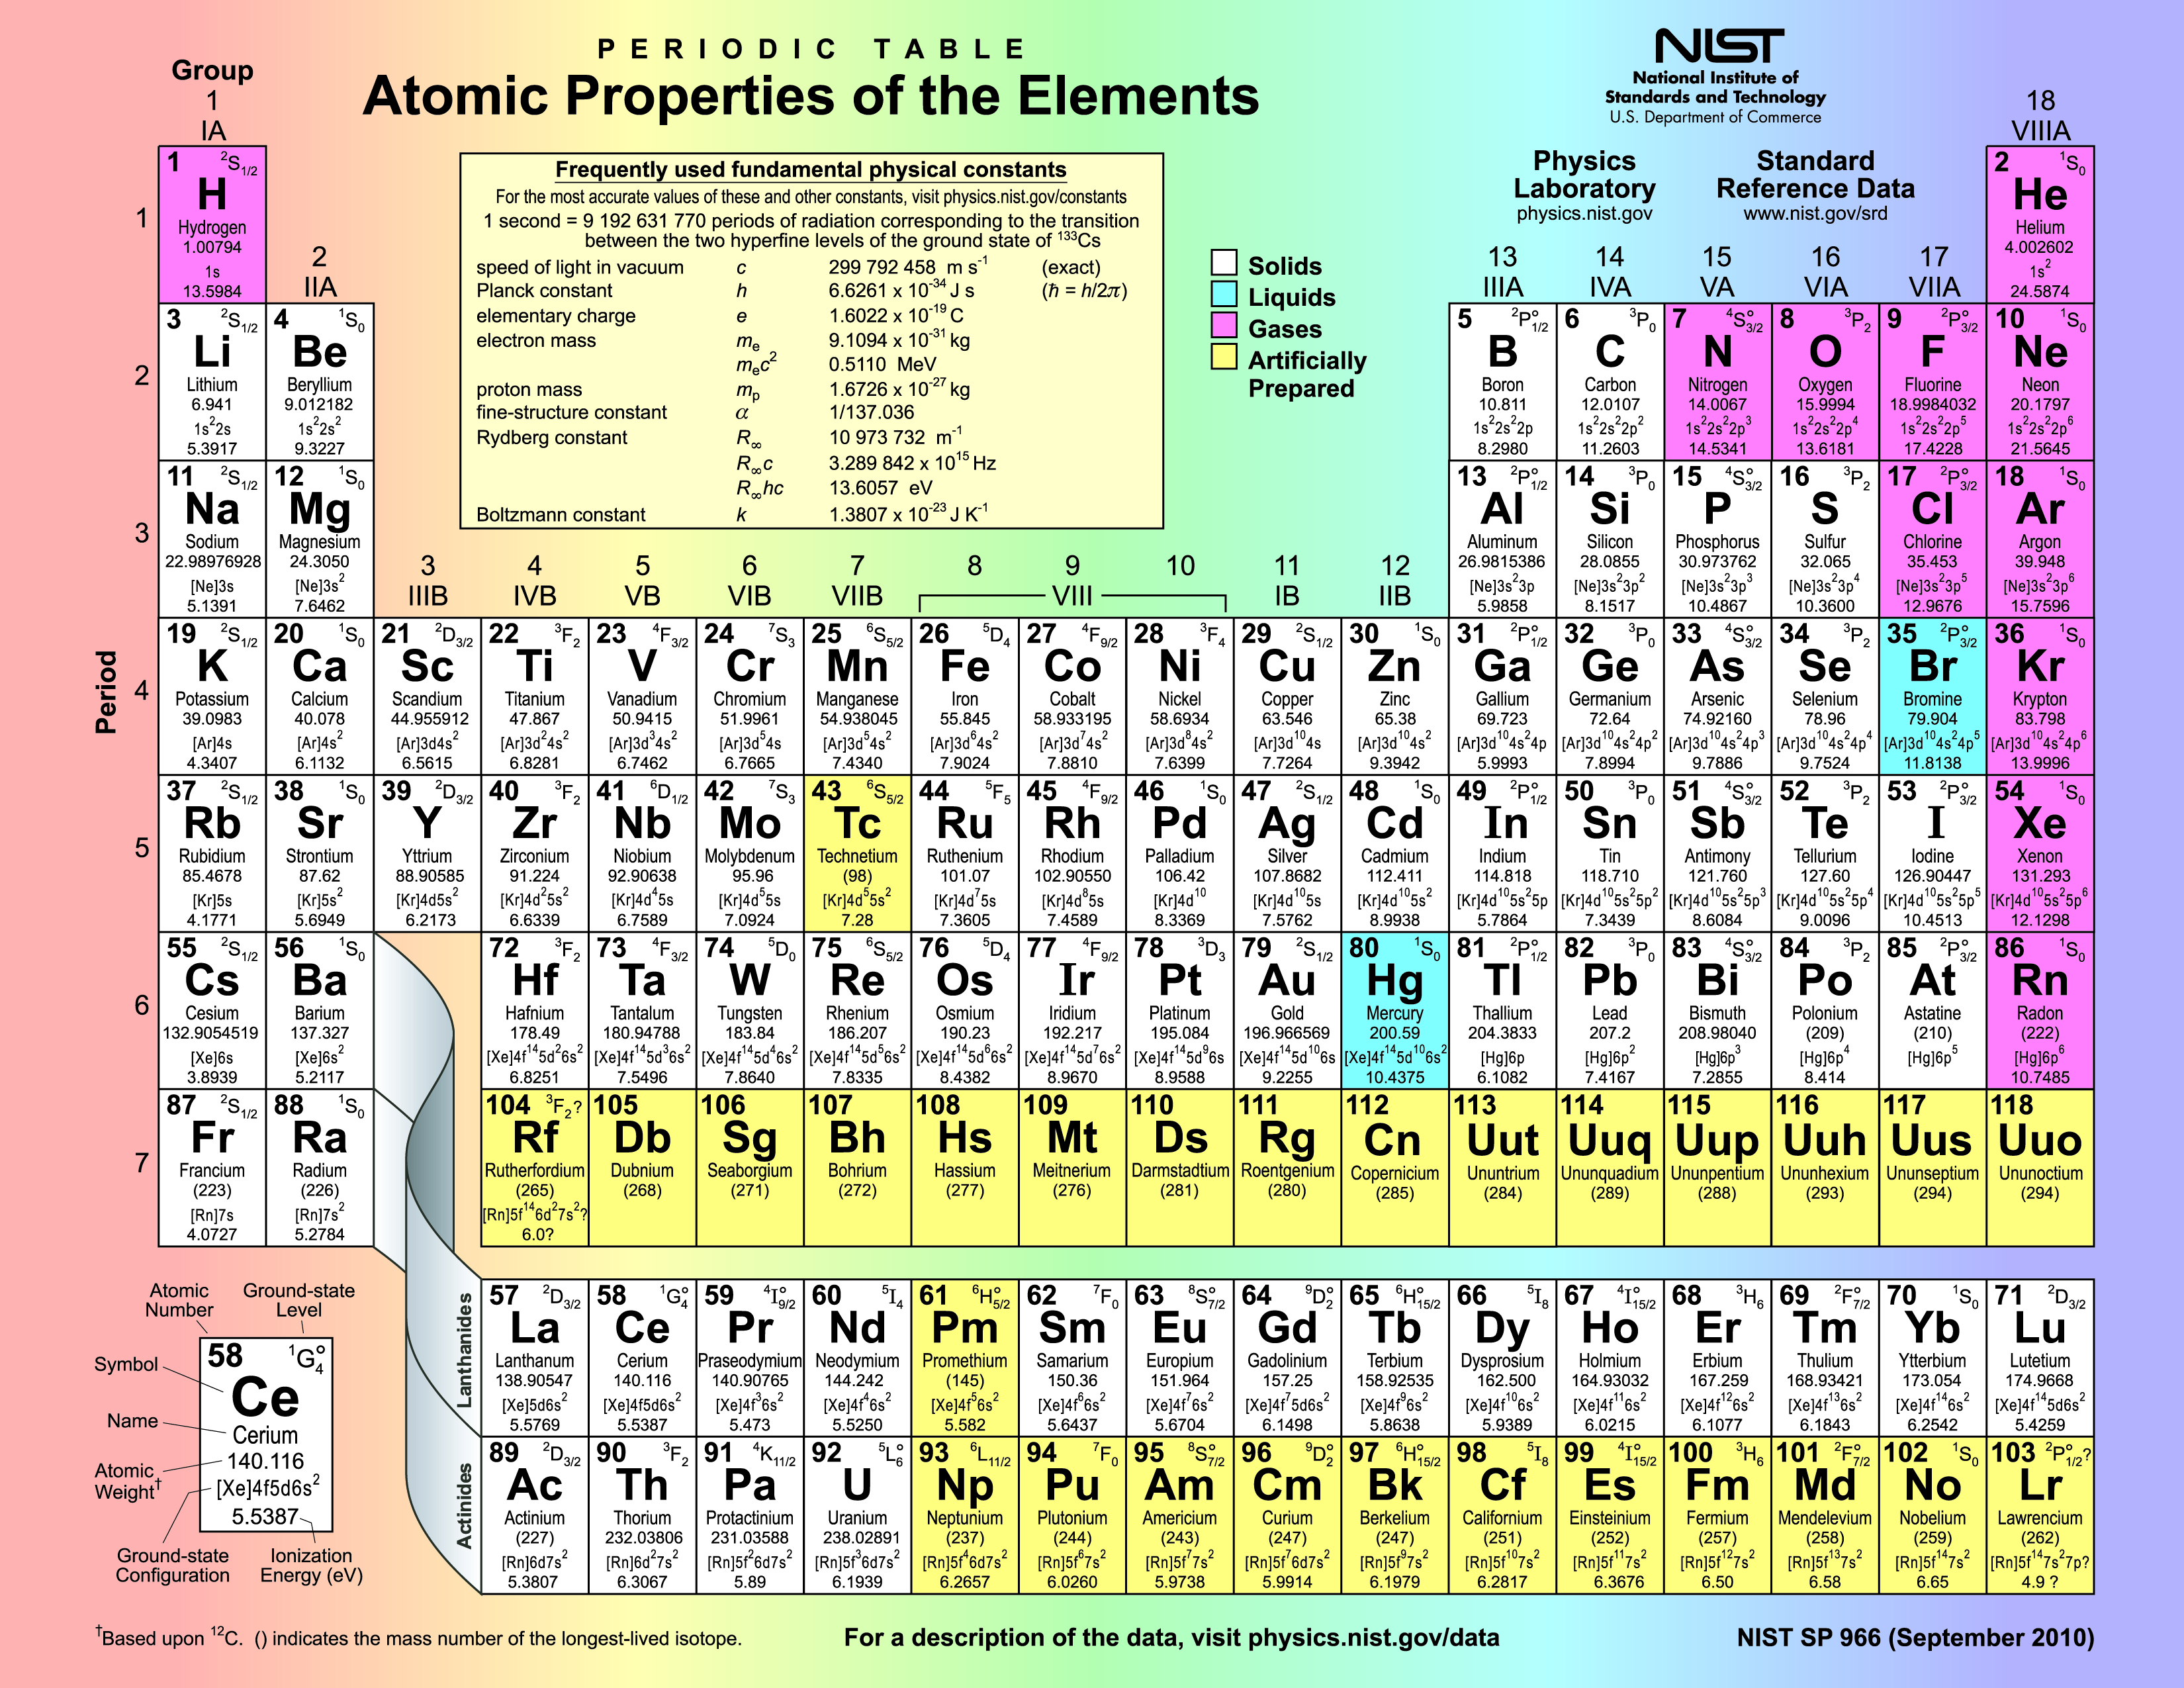 NIST_L2_EXT_Article_Mole_Image_PeriodicTable.png